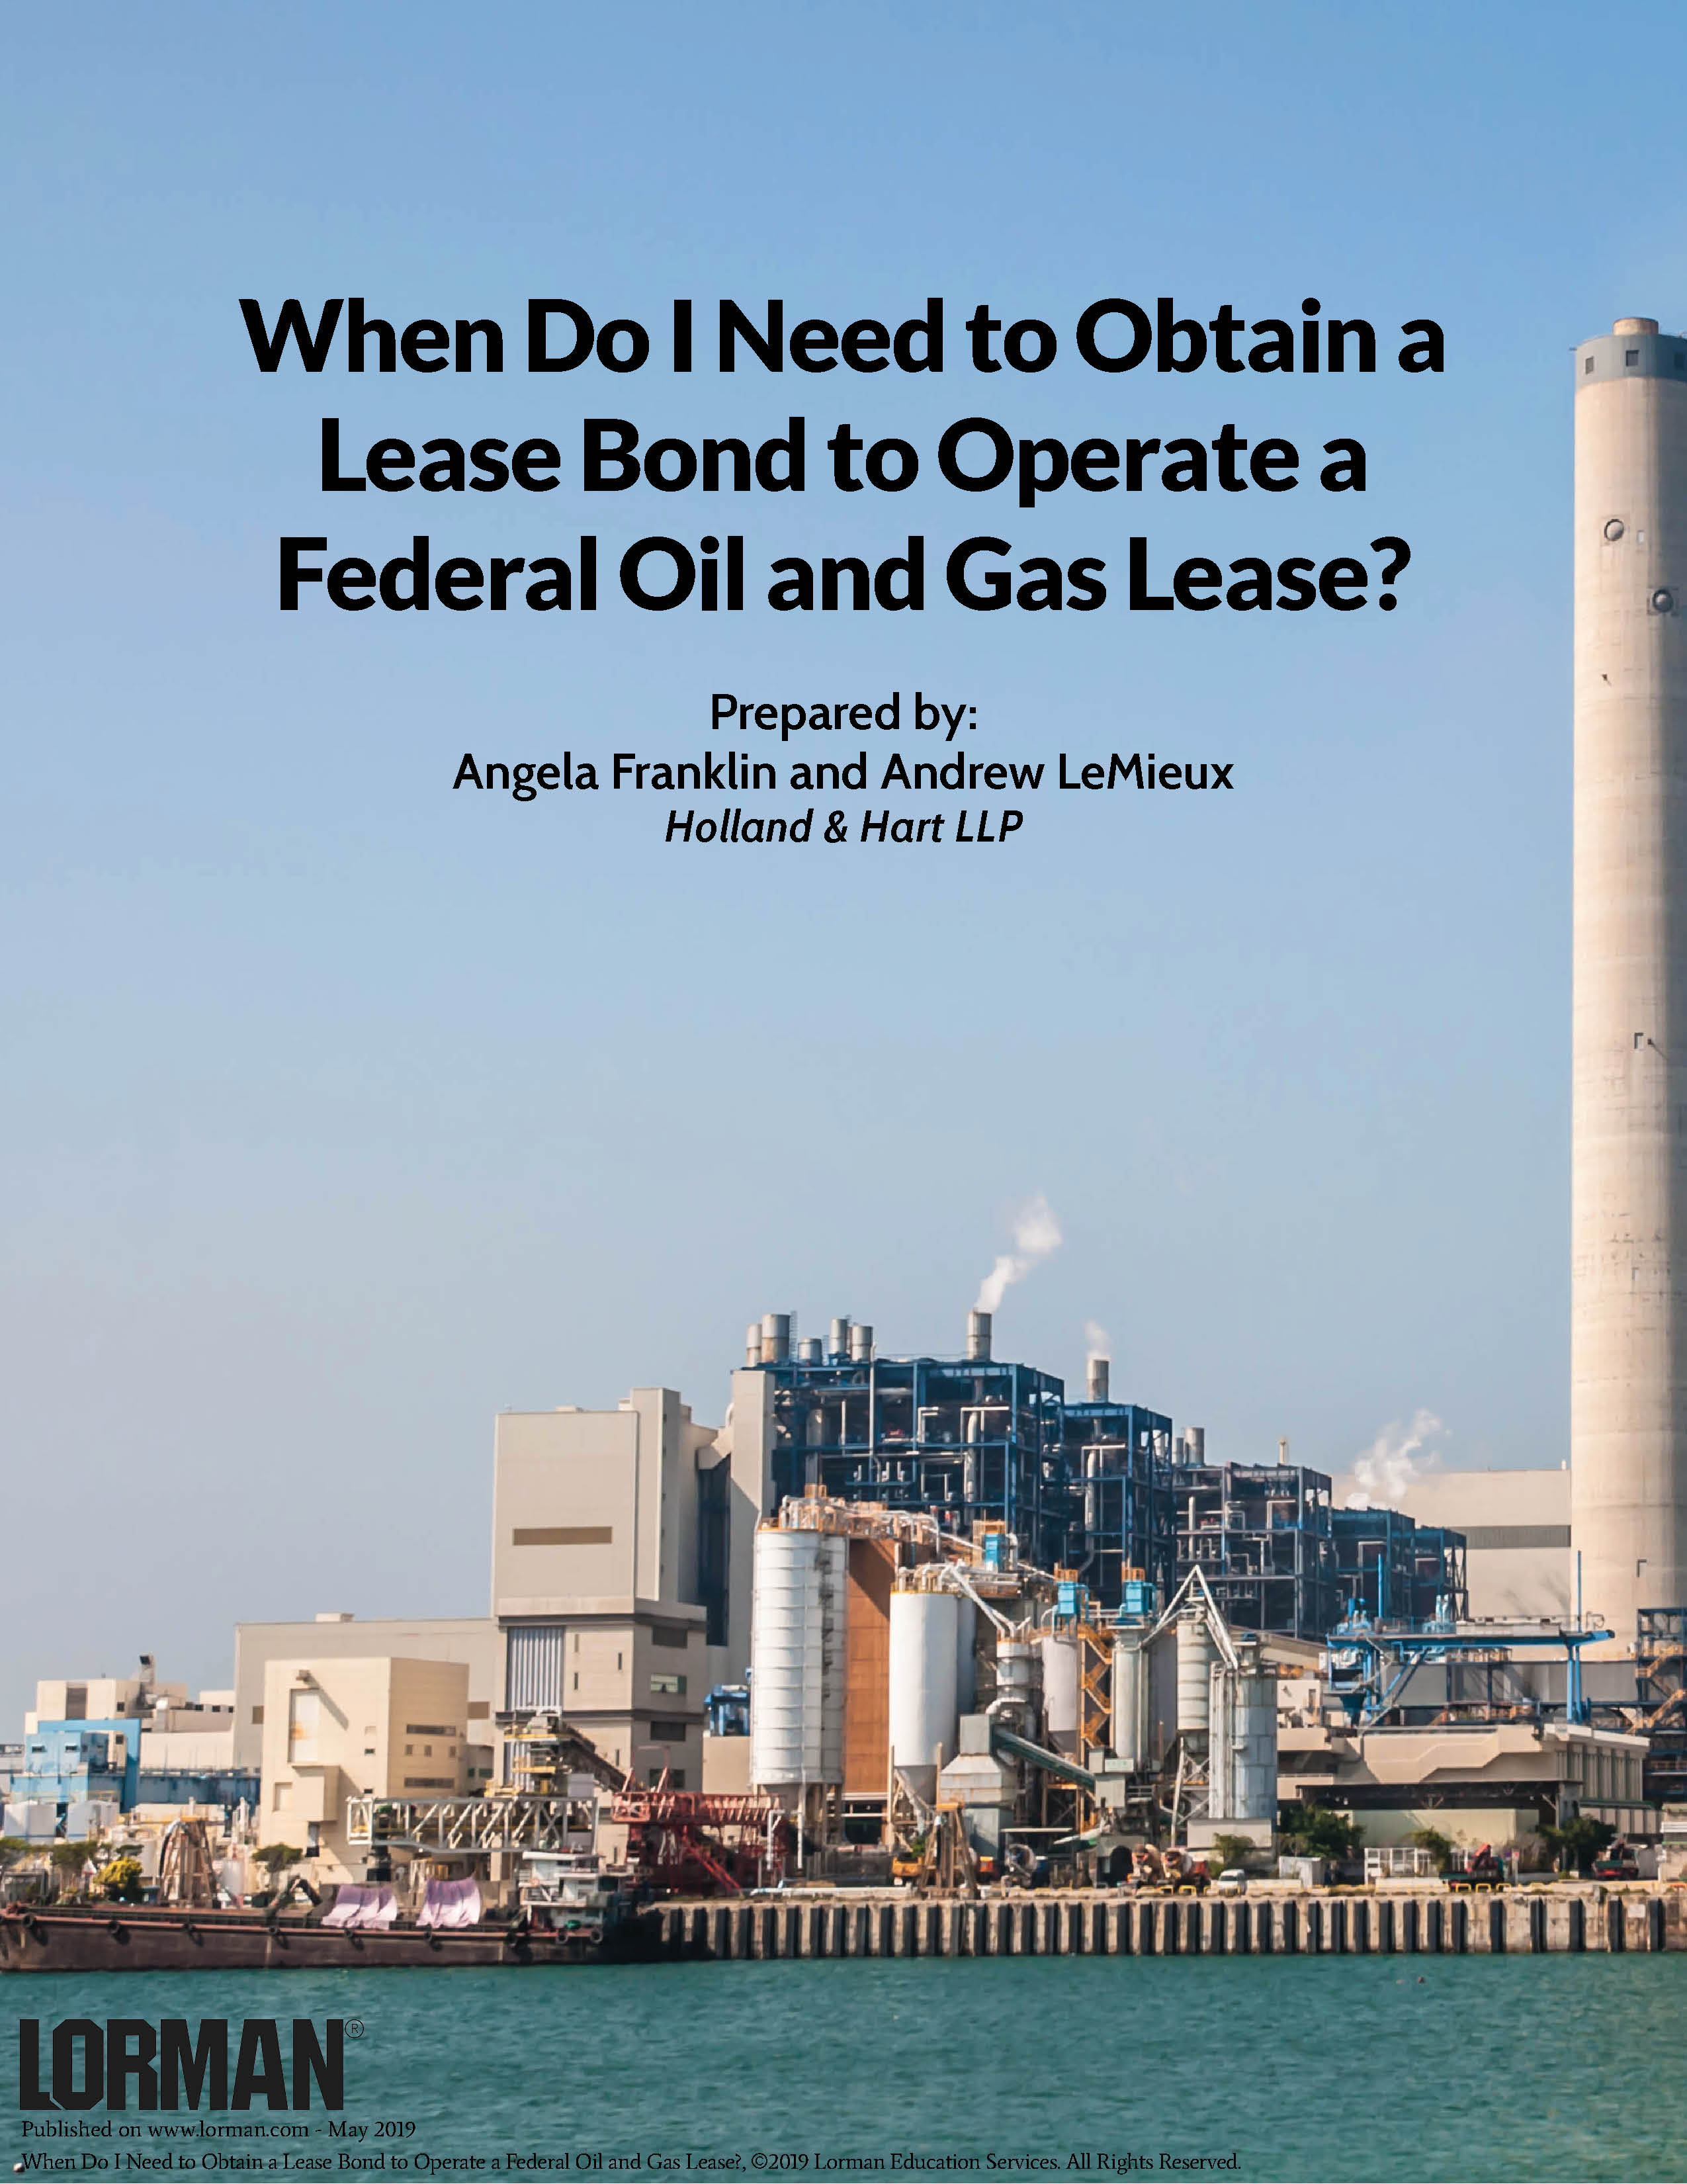 When Do I Need to Obtain a Lease Bond to Operate a Federal Oil and Gas Lease?